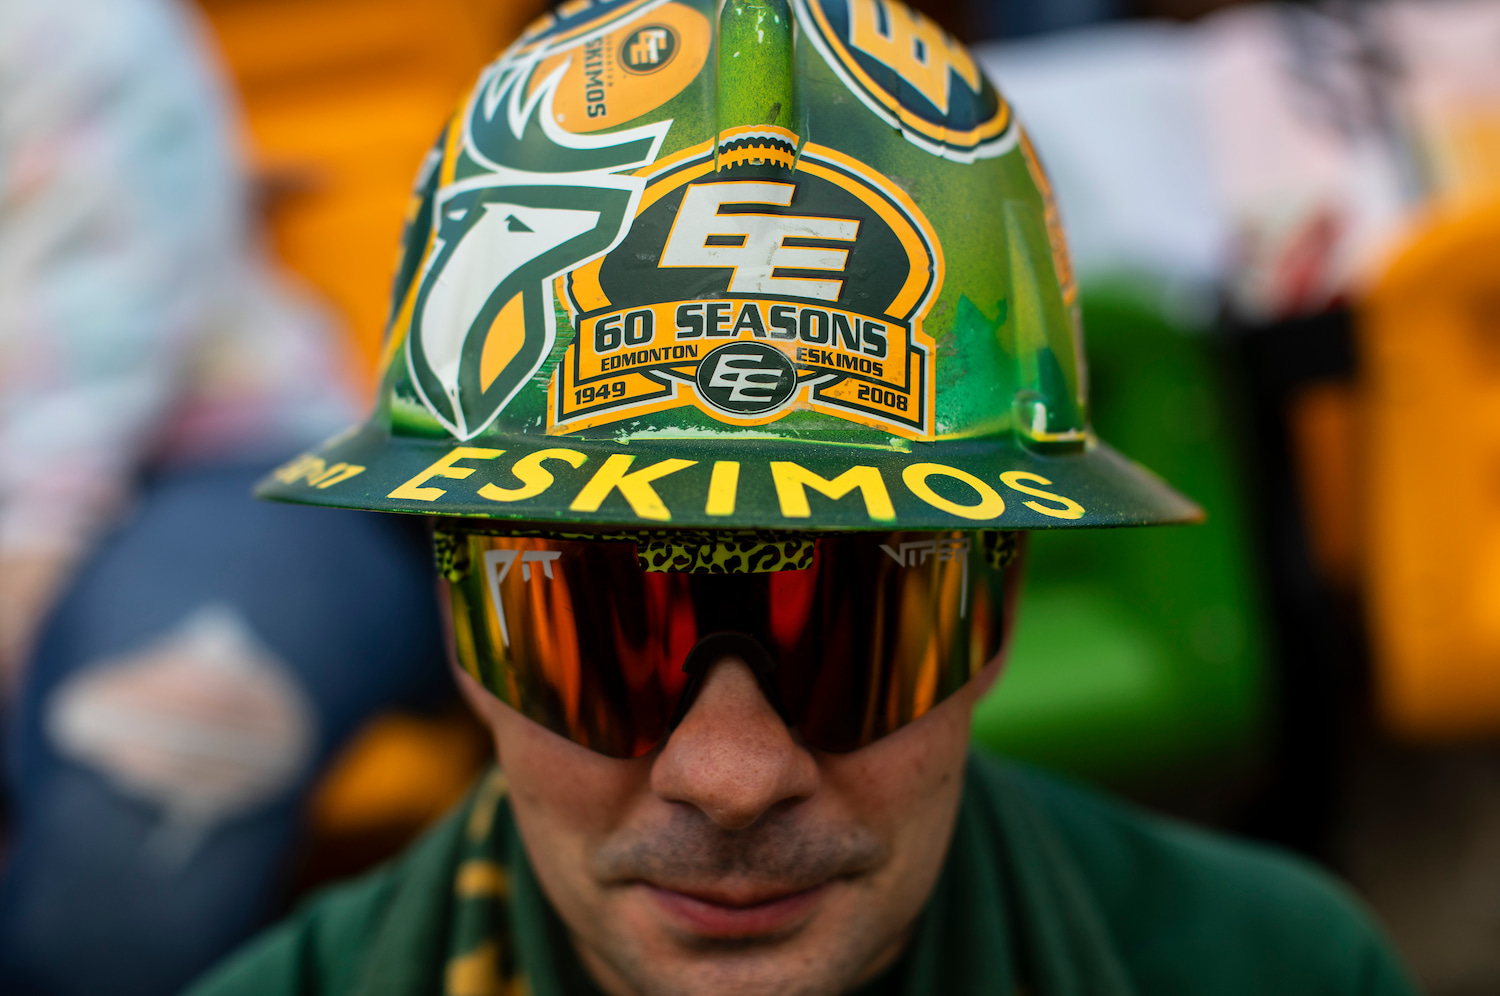 An Edmonton Elks fan wearing a hat with the team's old name.